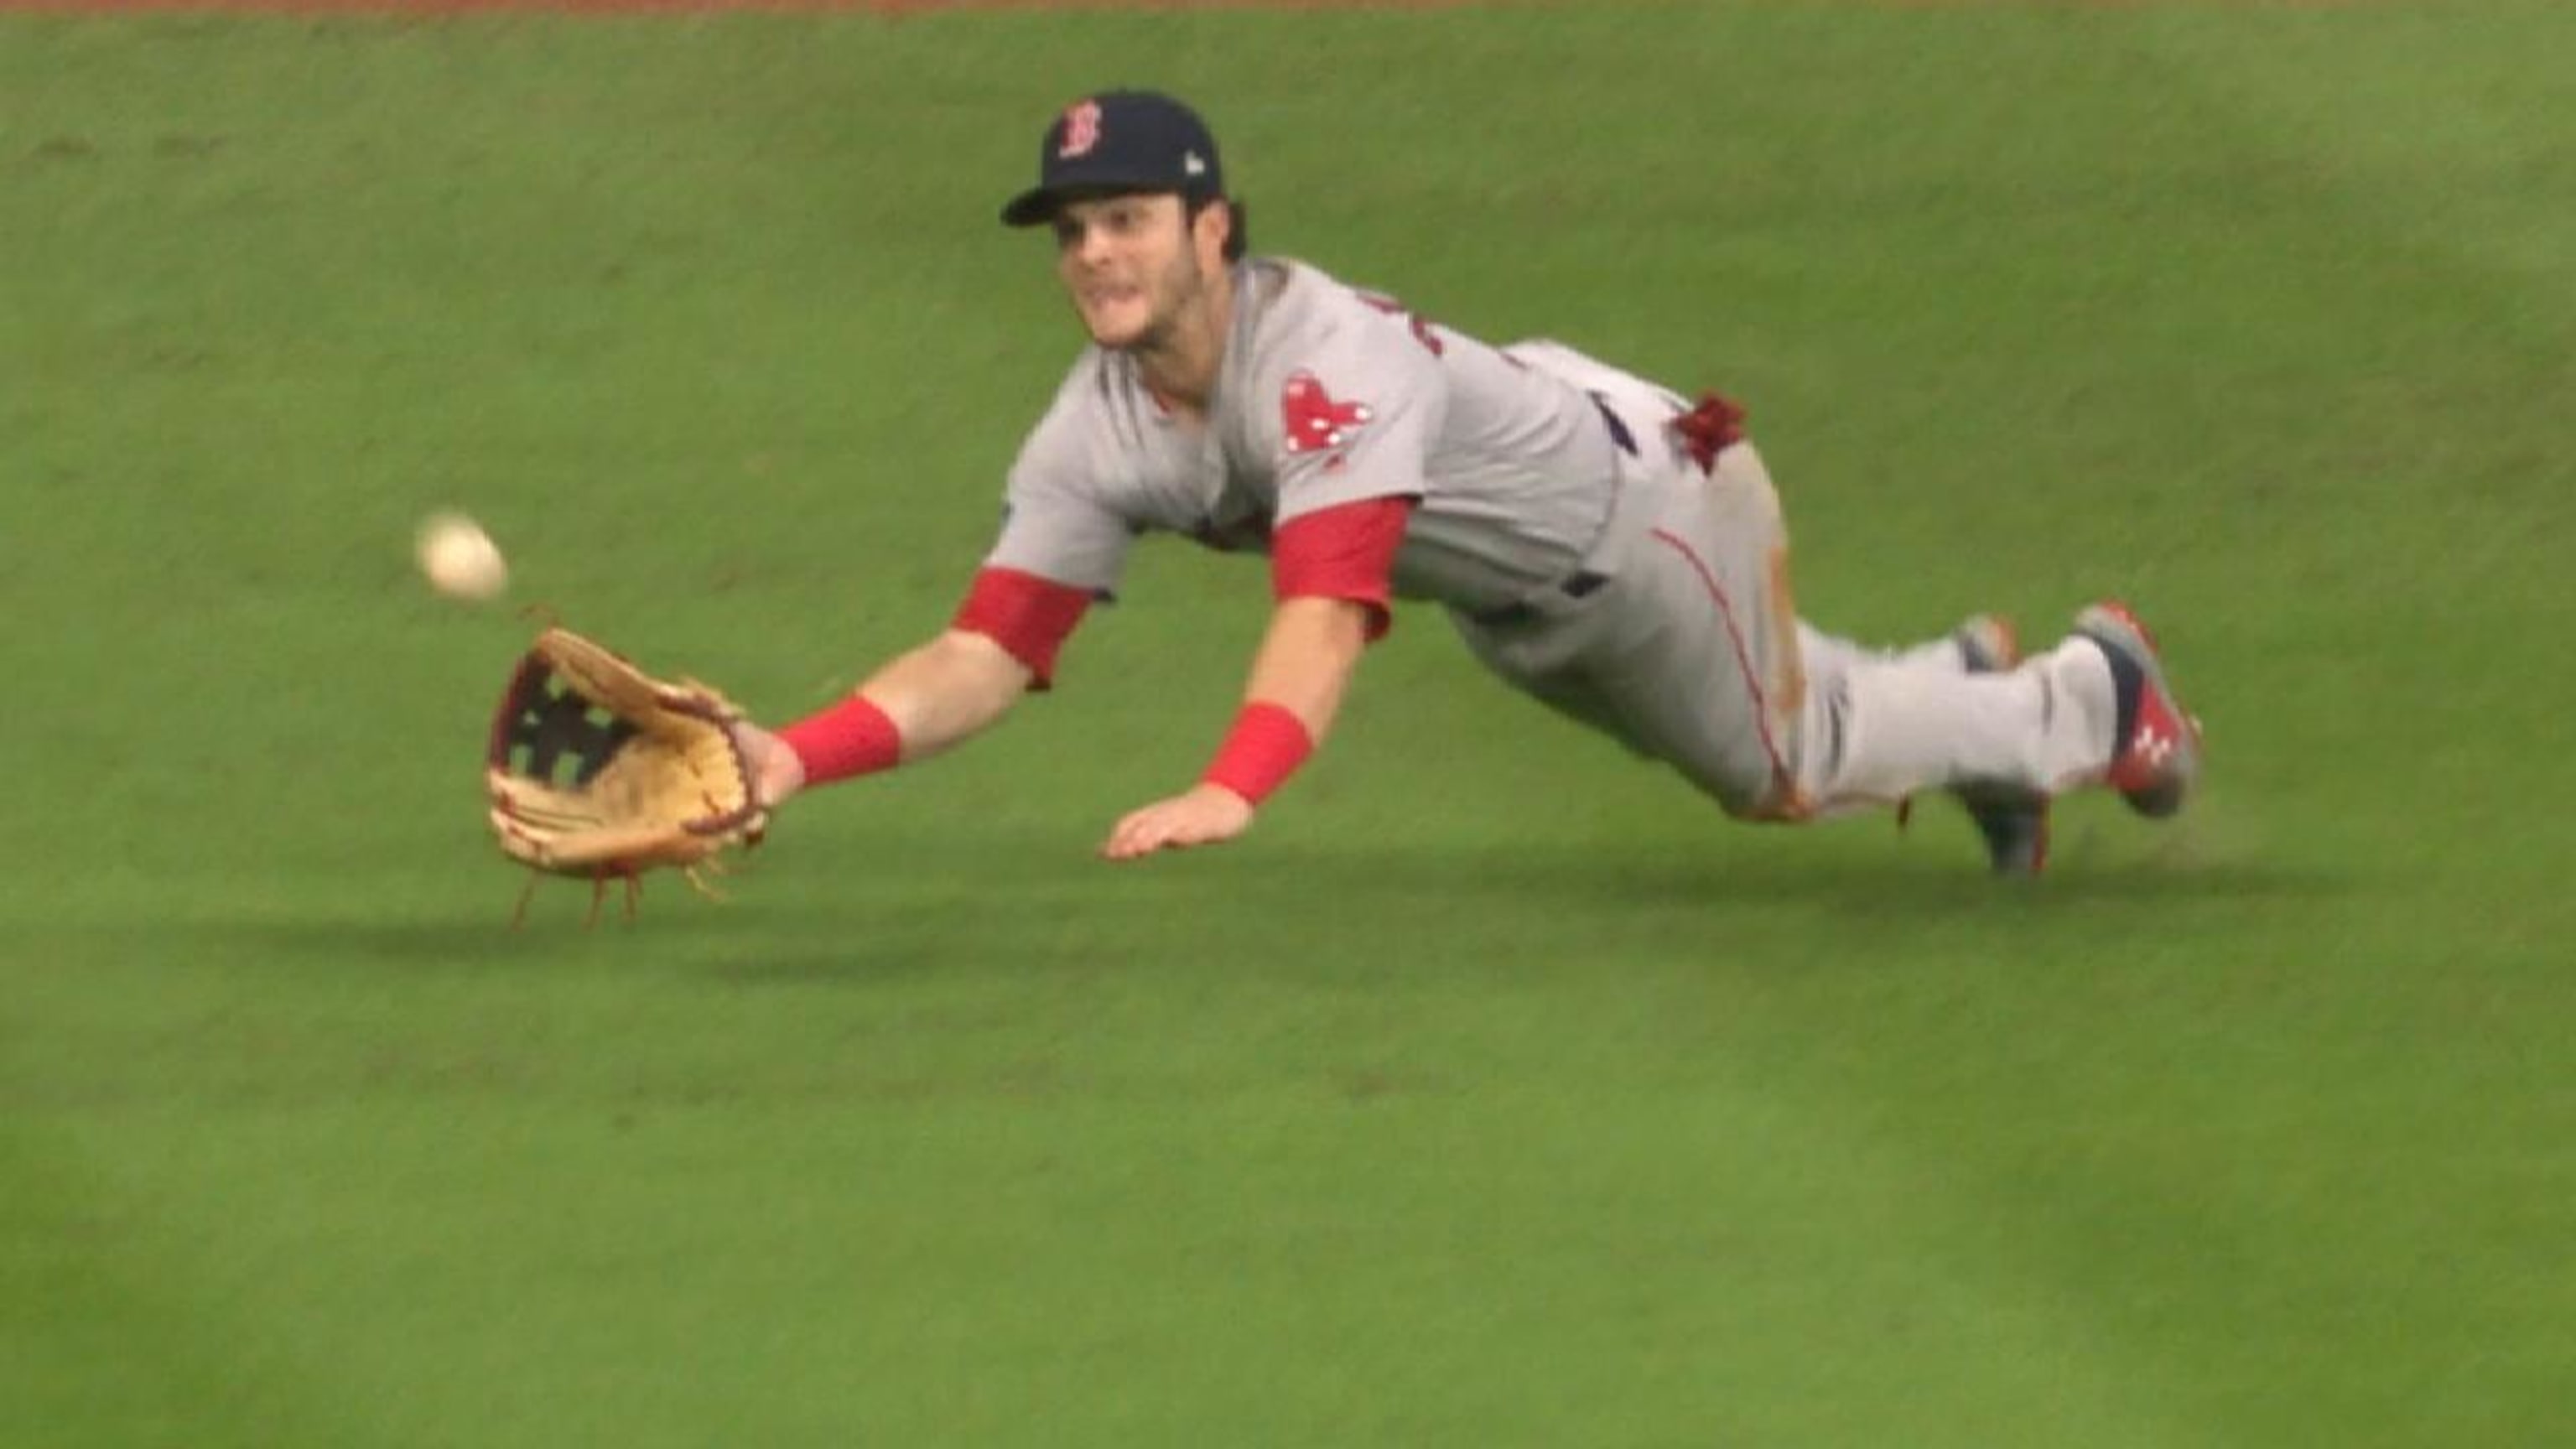 Watch an extended cut of Andrew Benintendi's game-ending catch